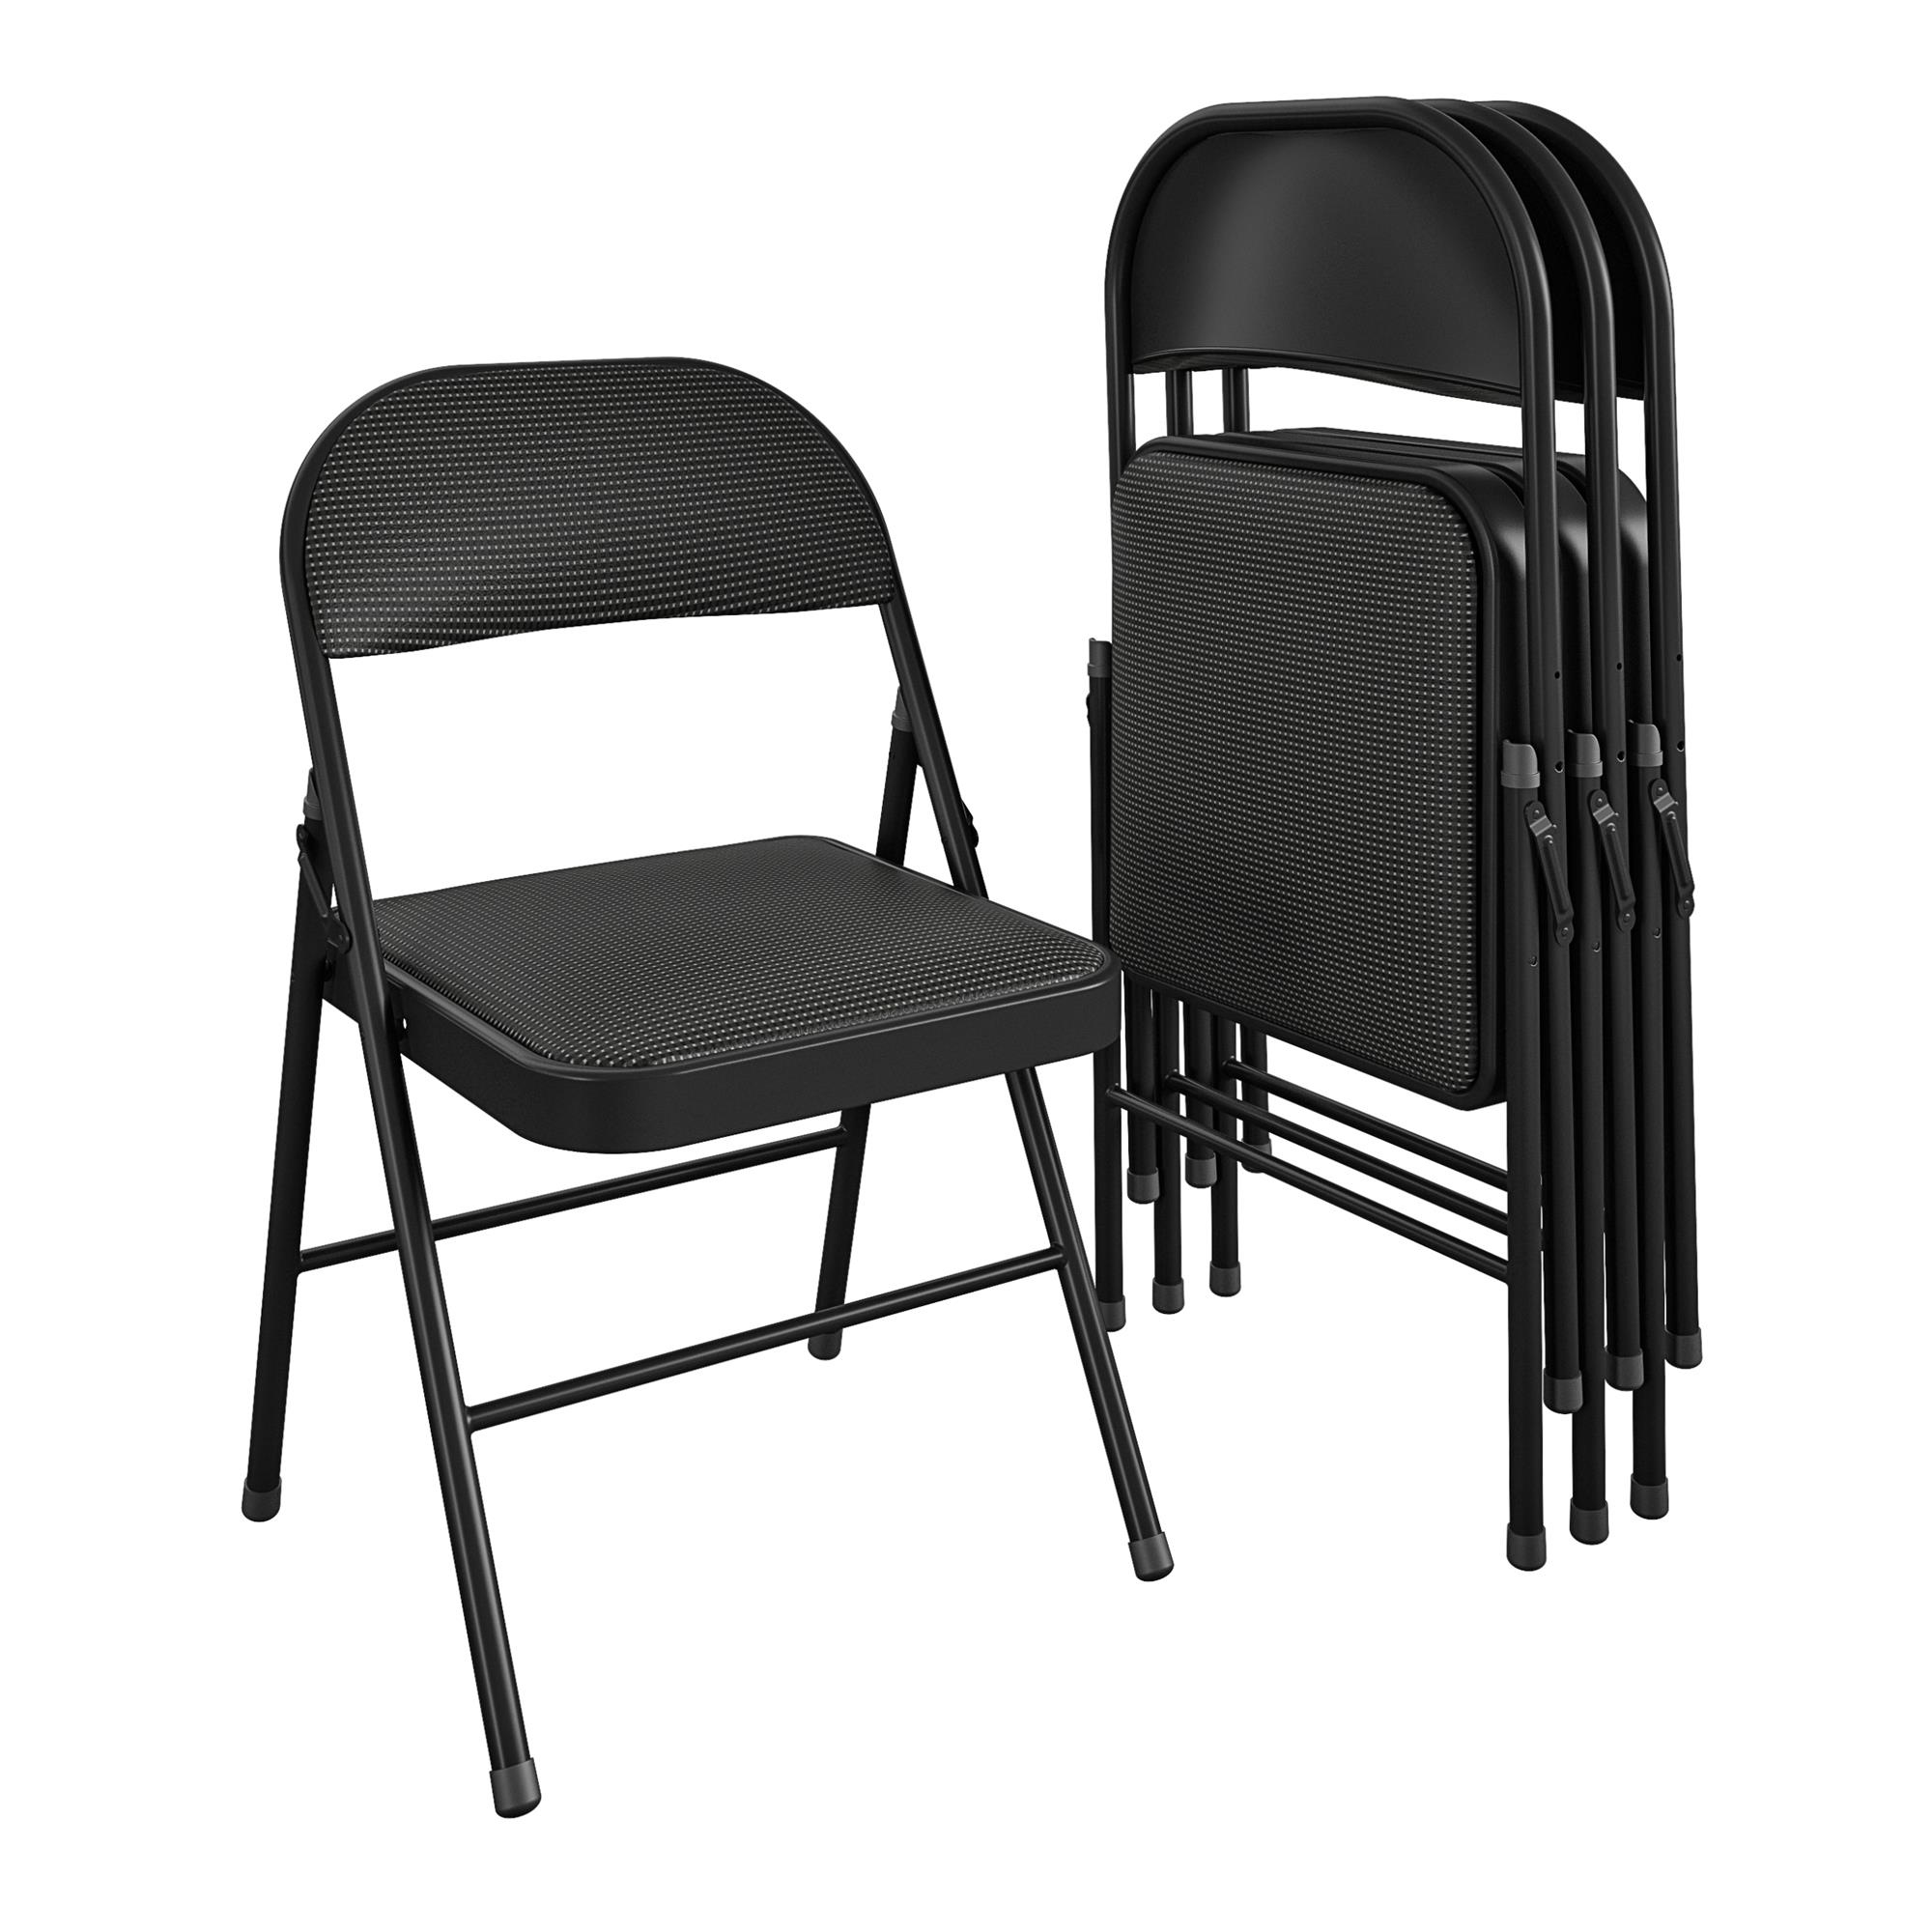 Mainstays Fabric Padded Folding Chair, Black, 4 Count - image 1 of 12